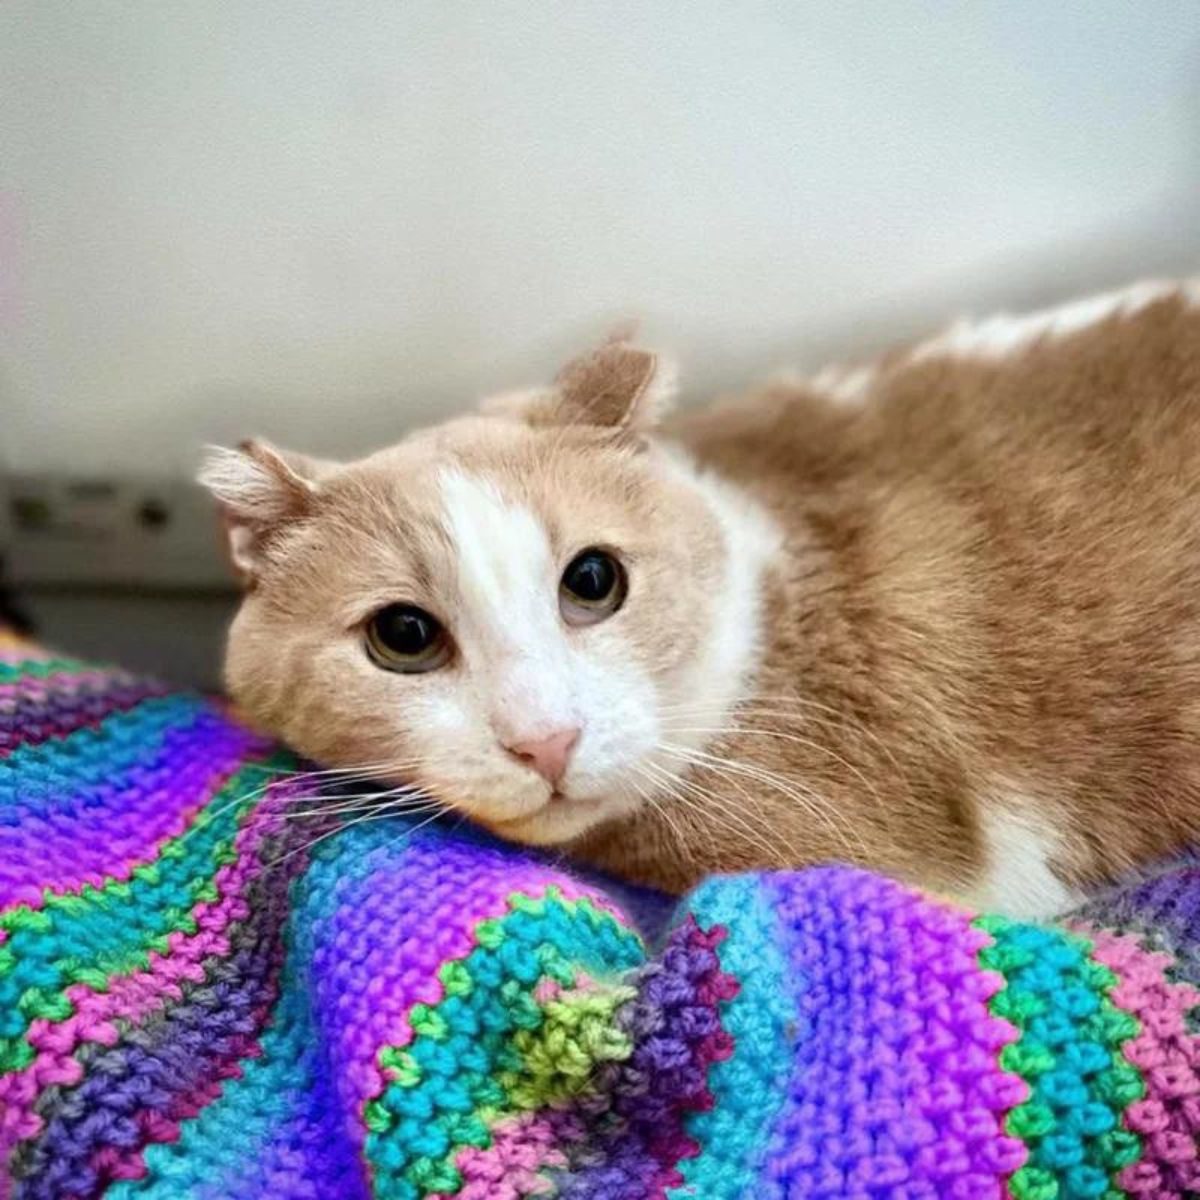 cat laying on the colorful blanket